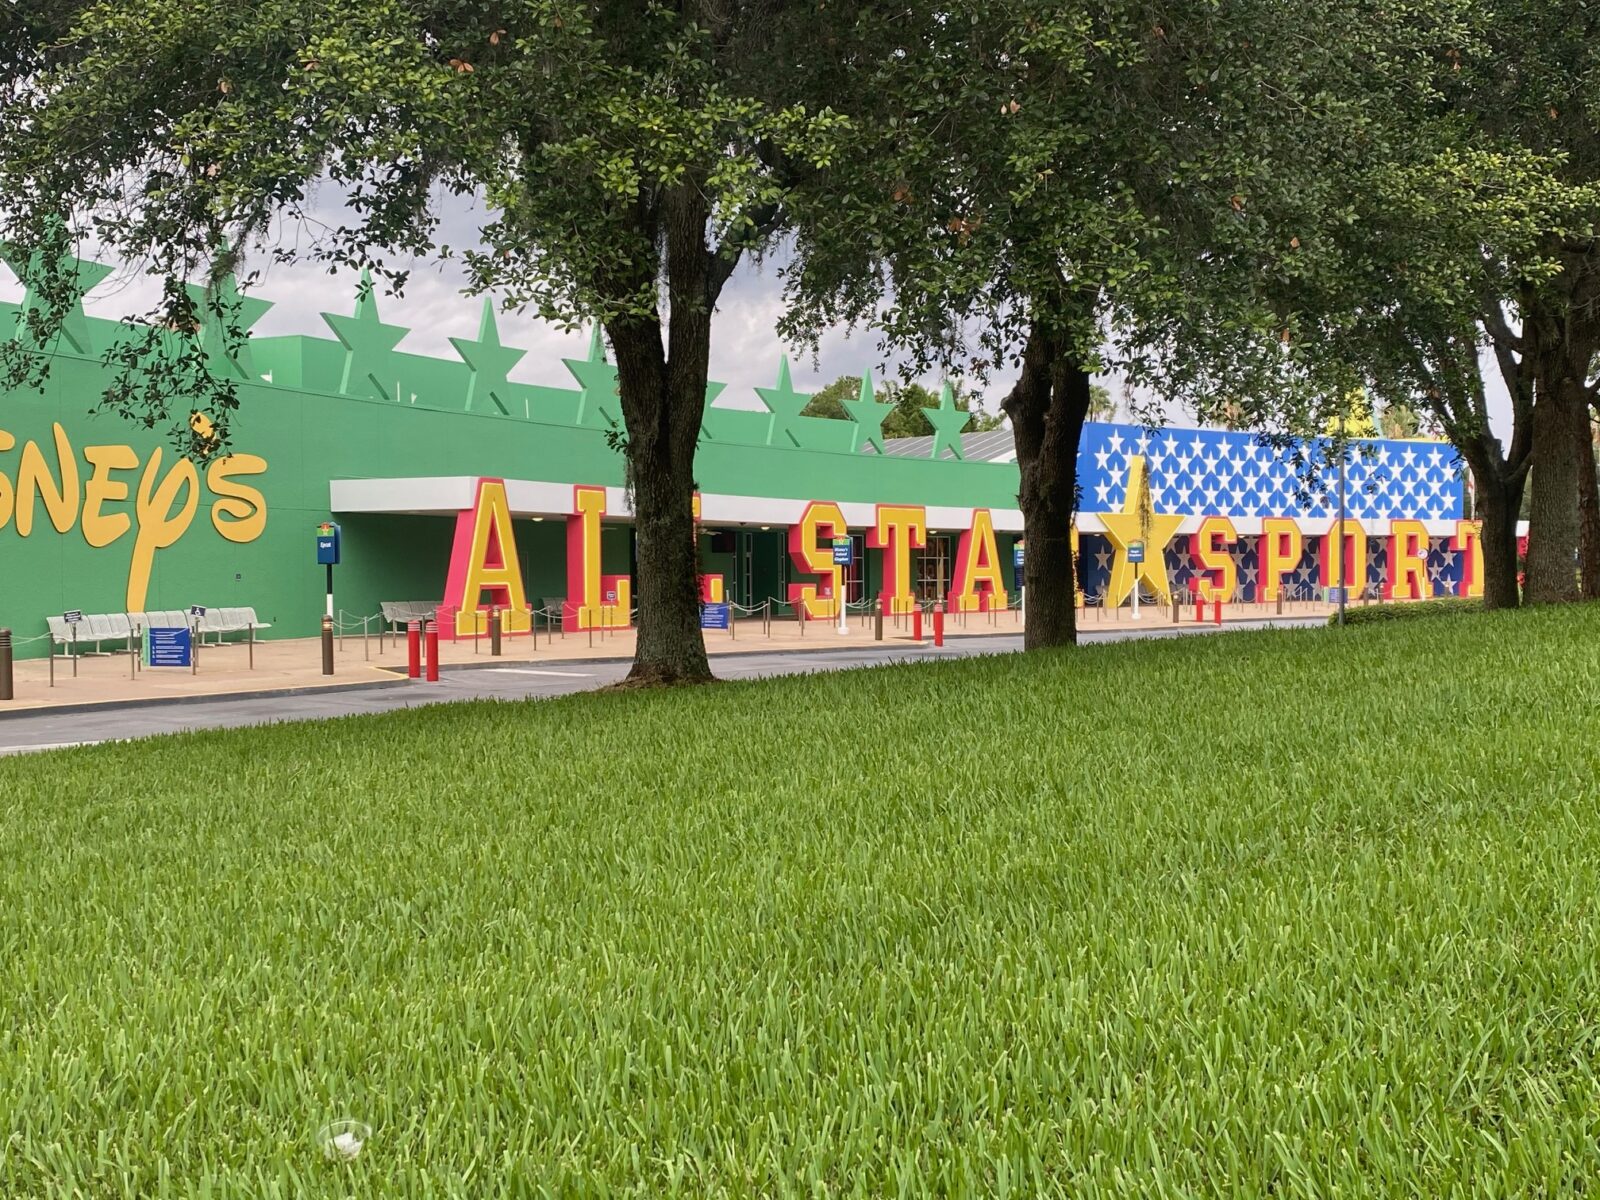 trees and grass in front of colorful hotel sign and entrance for all star sports Disney World resort 